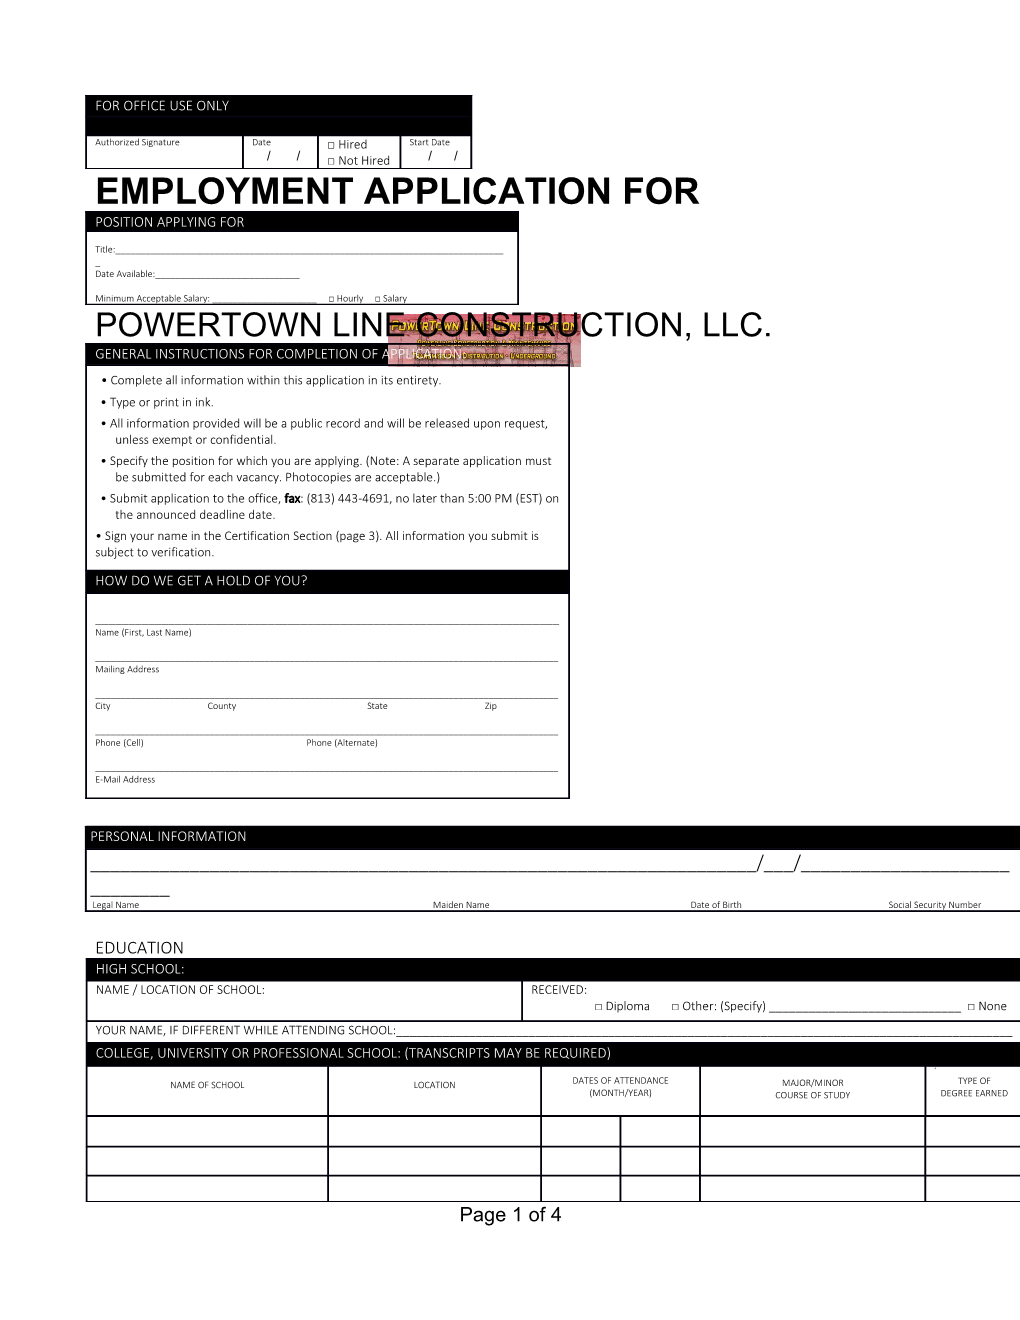 Employment Application For